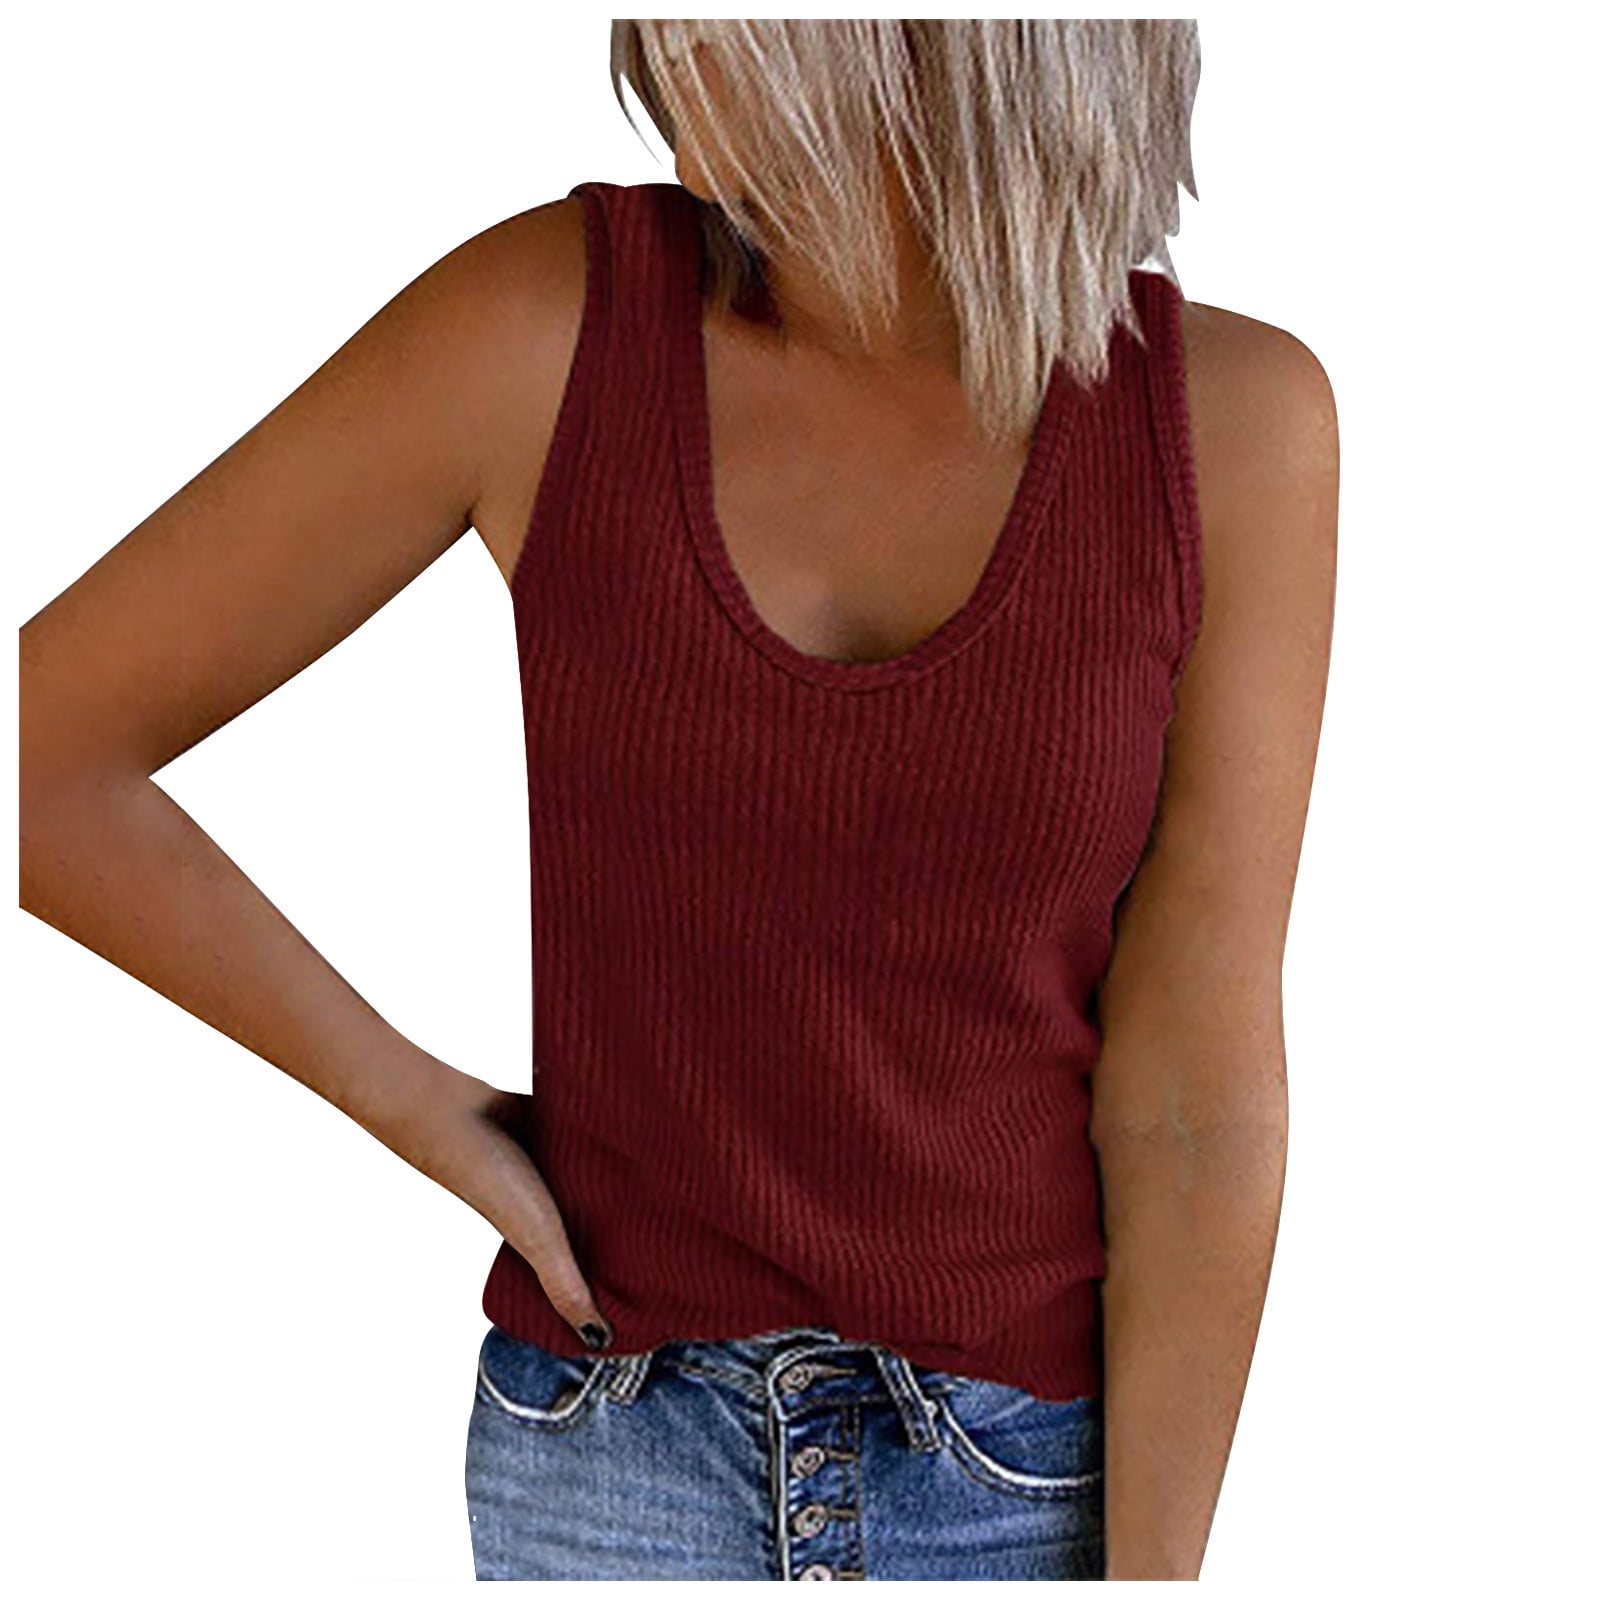 RQYYD Reduced Women's Sleeveless Plus Size Knit Ribbed Tank Tops Summer  Casual U Neck Vest Shirts Solid Color Basic Tee Tops Wine S